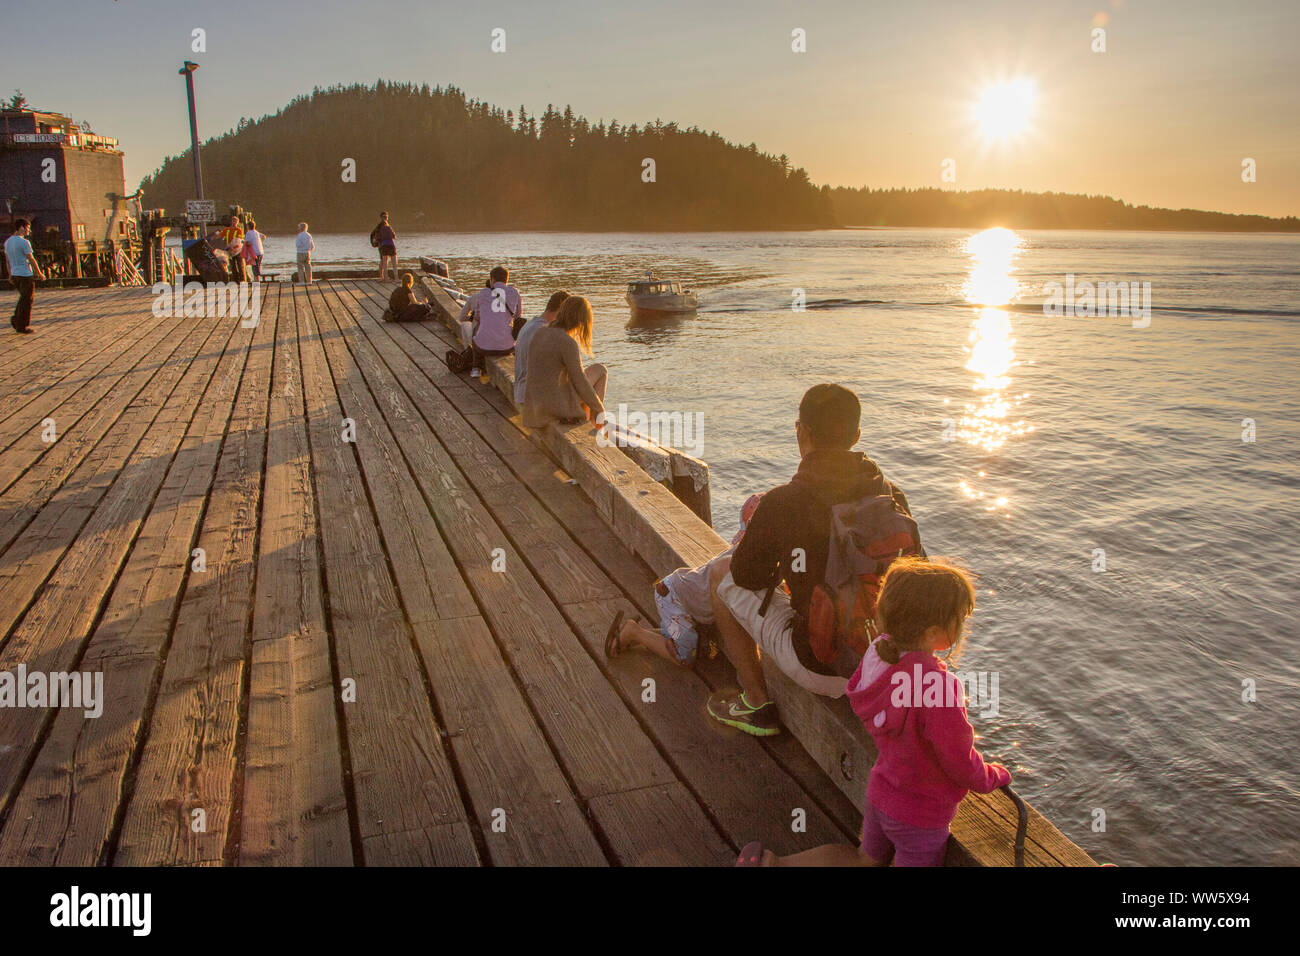 Evening mood at a jetty with people, Vancouver Island Stock Photo